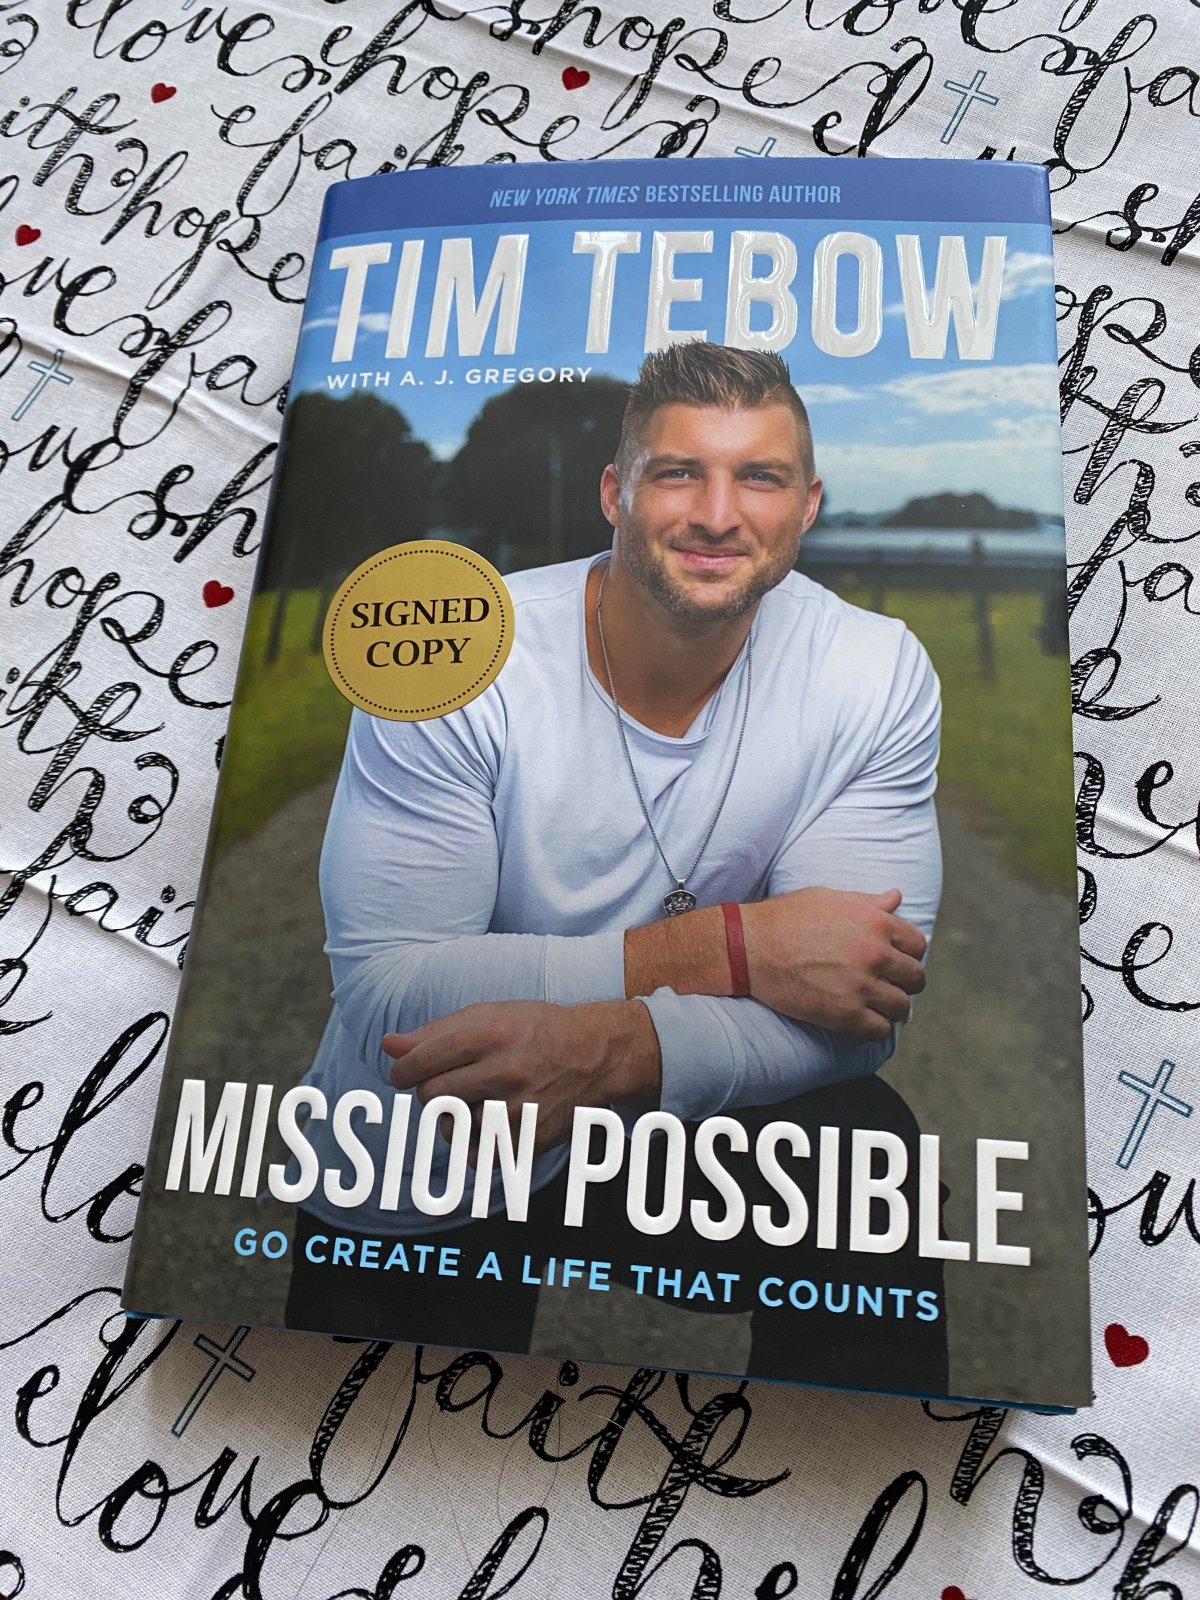 Tim Tebow Believes in “Mission Possible”